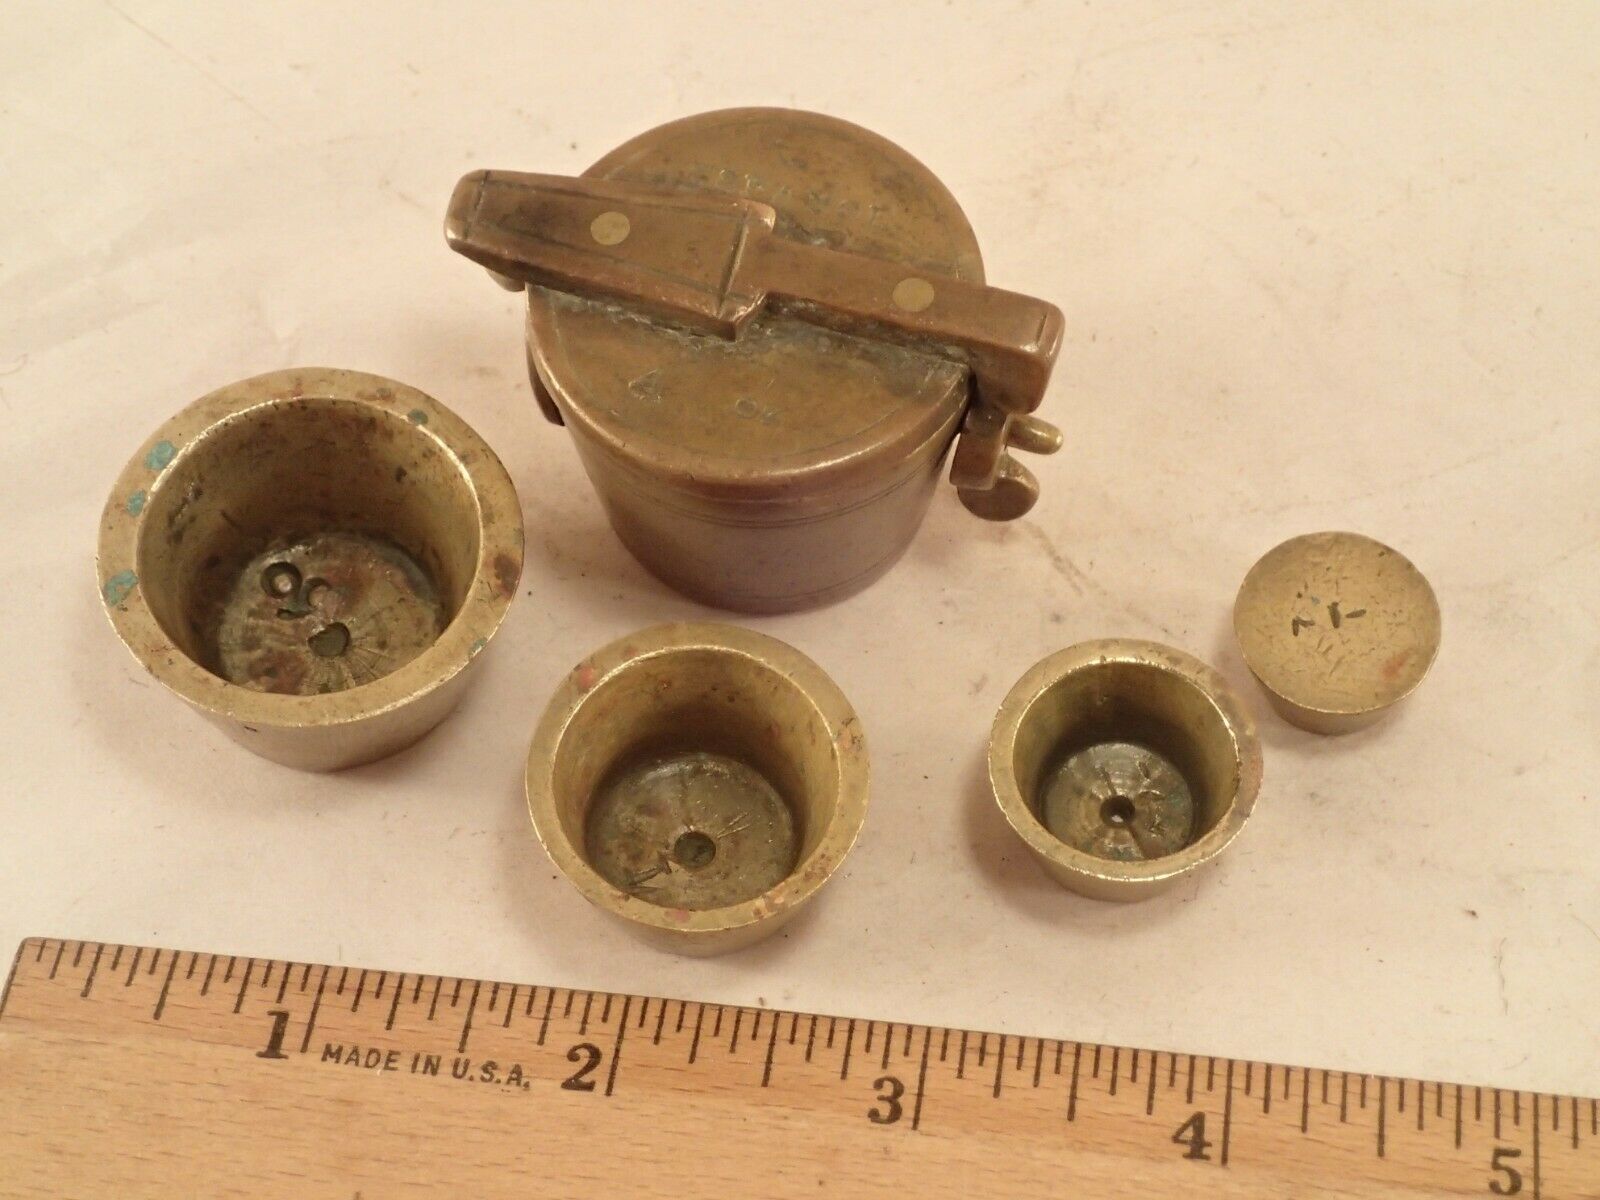 Atqe Spanish 5 Piece Set Of Brass Nesting Apothecary Scale Weights Measure Cups